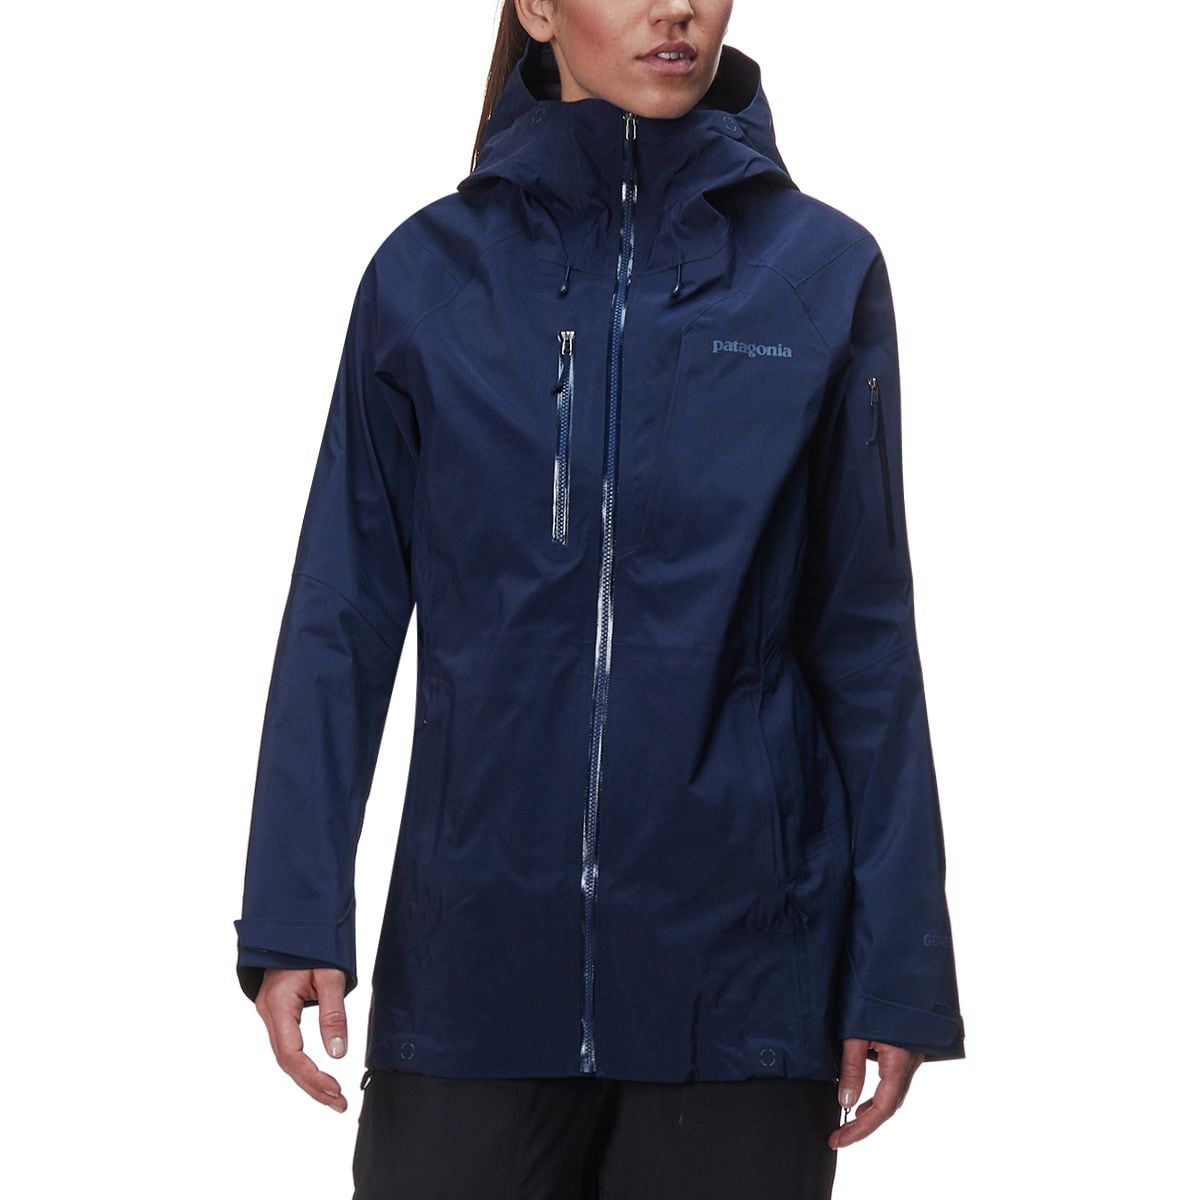 Patagonia Powslayer Jacket - Women's Classic Navy